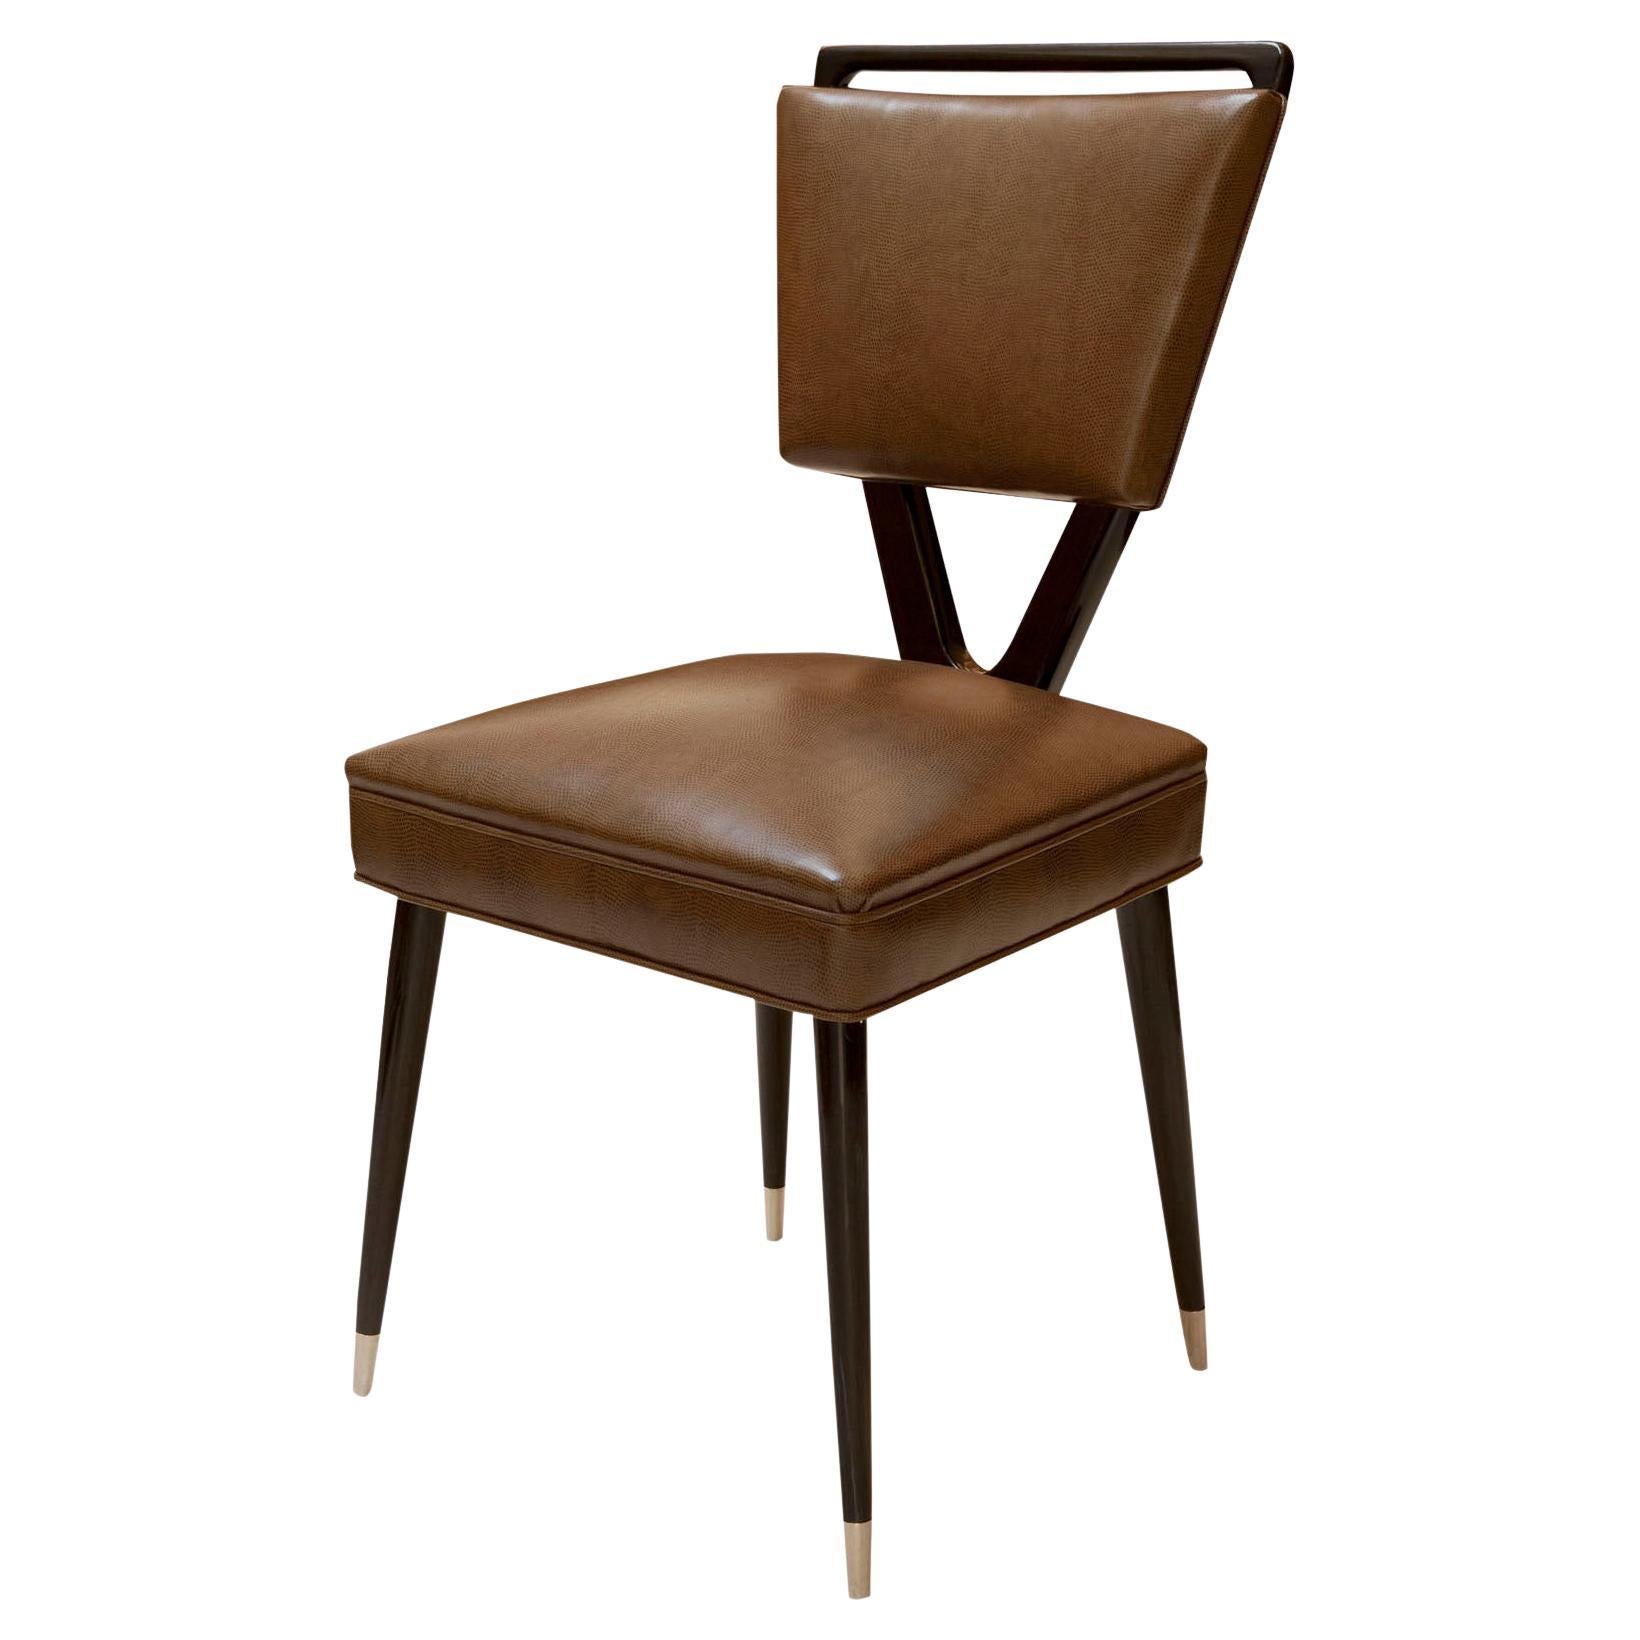 12 Dining Chairs 60° in Leather and Wood, Italian " Free Shipping in Florida " For Sale